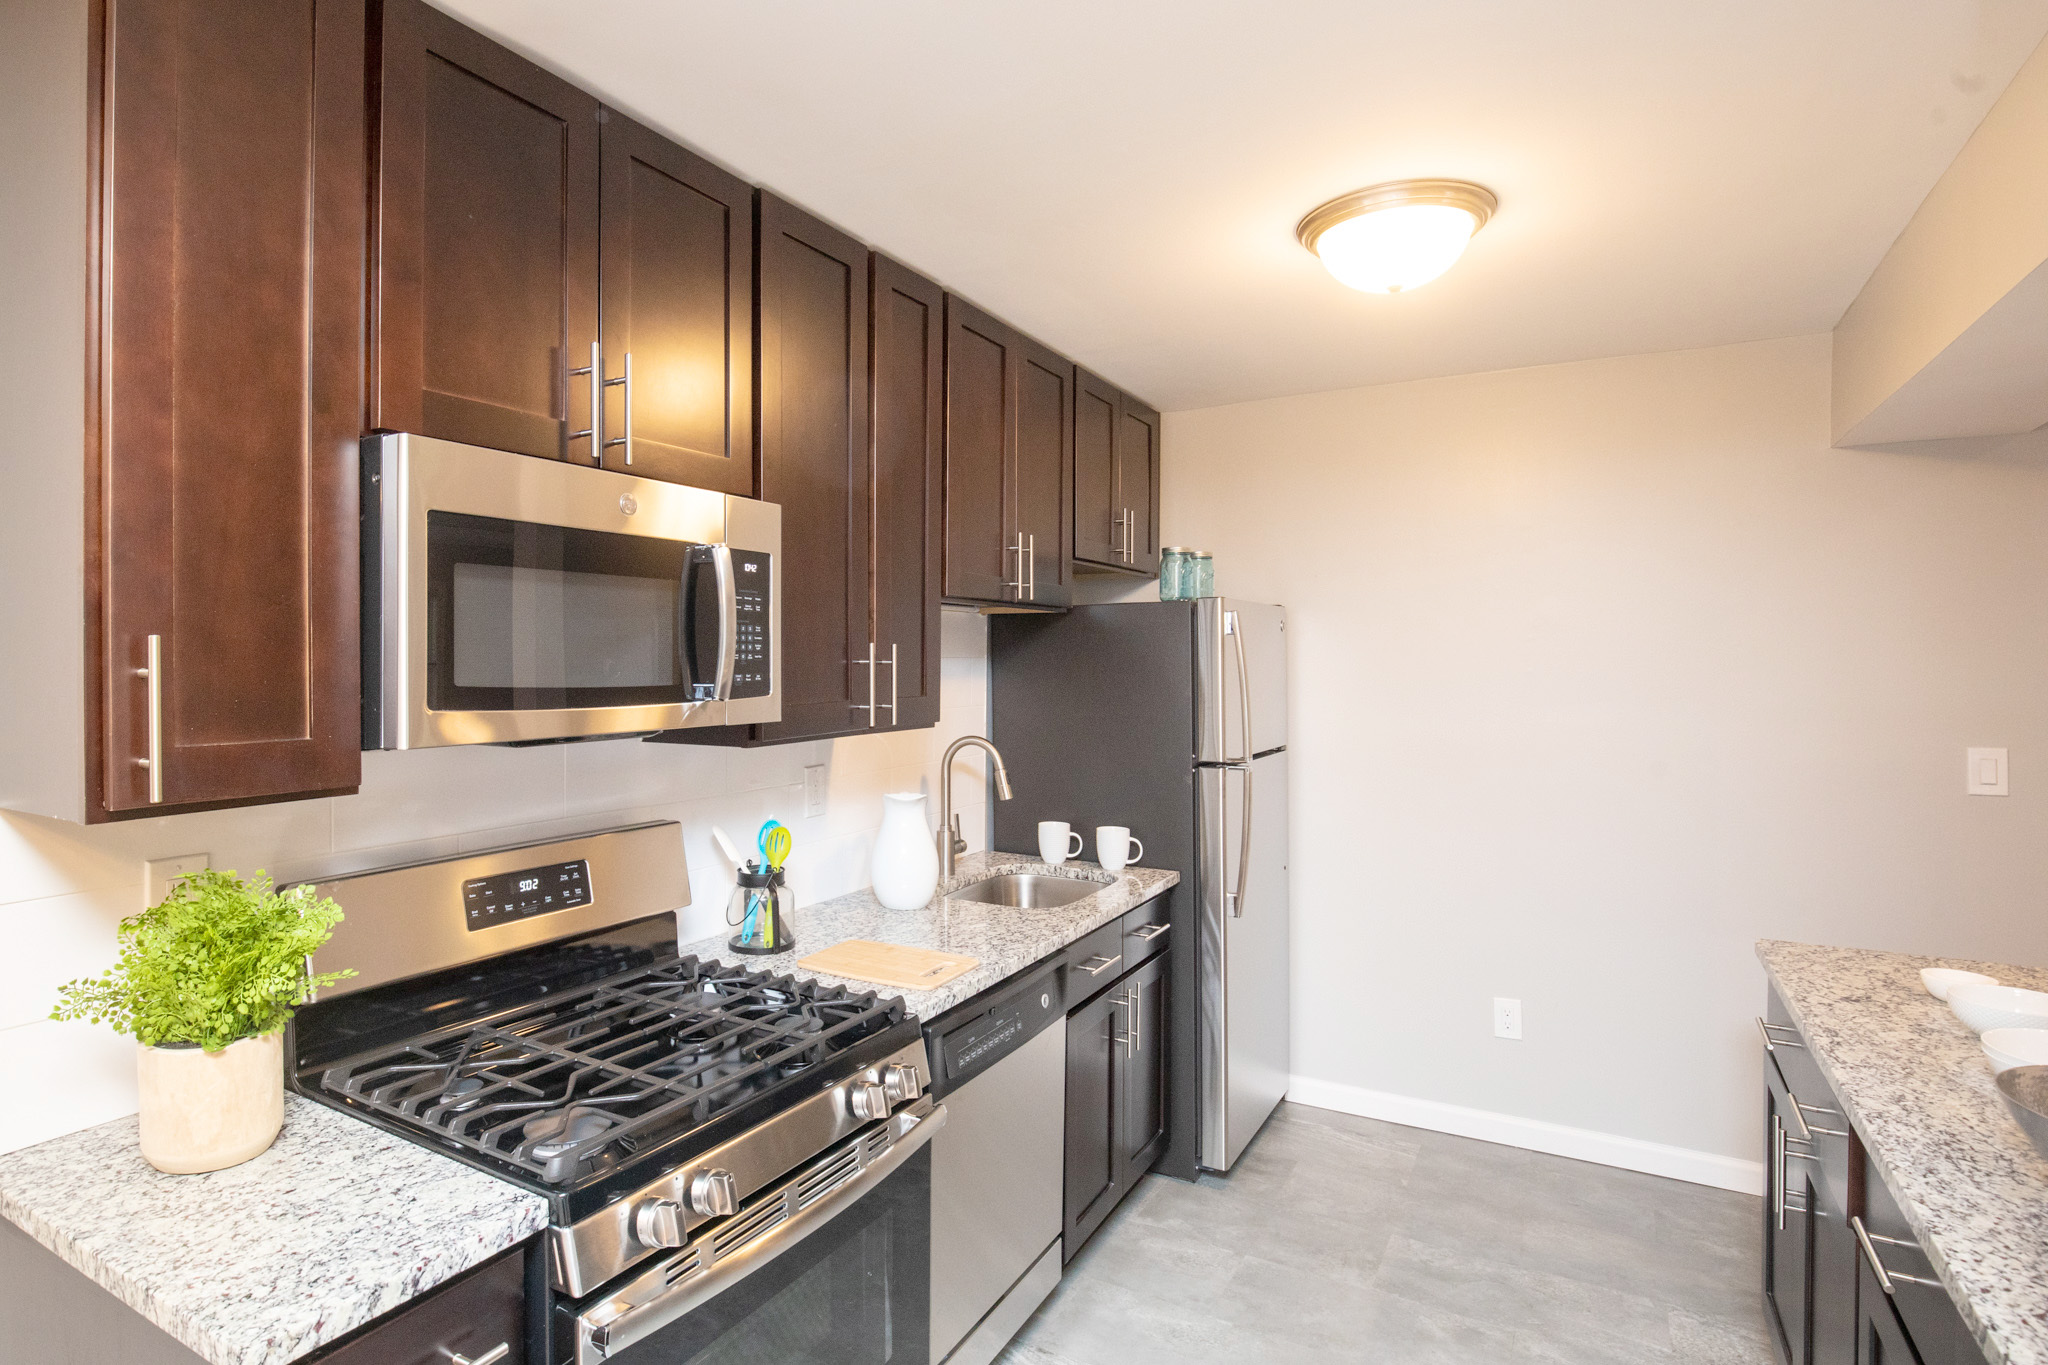 Countertop, new appliances and open space in a kitchen at Millbrook Village